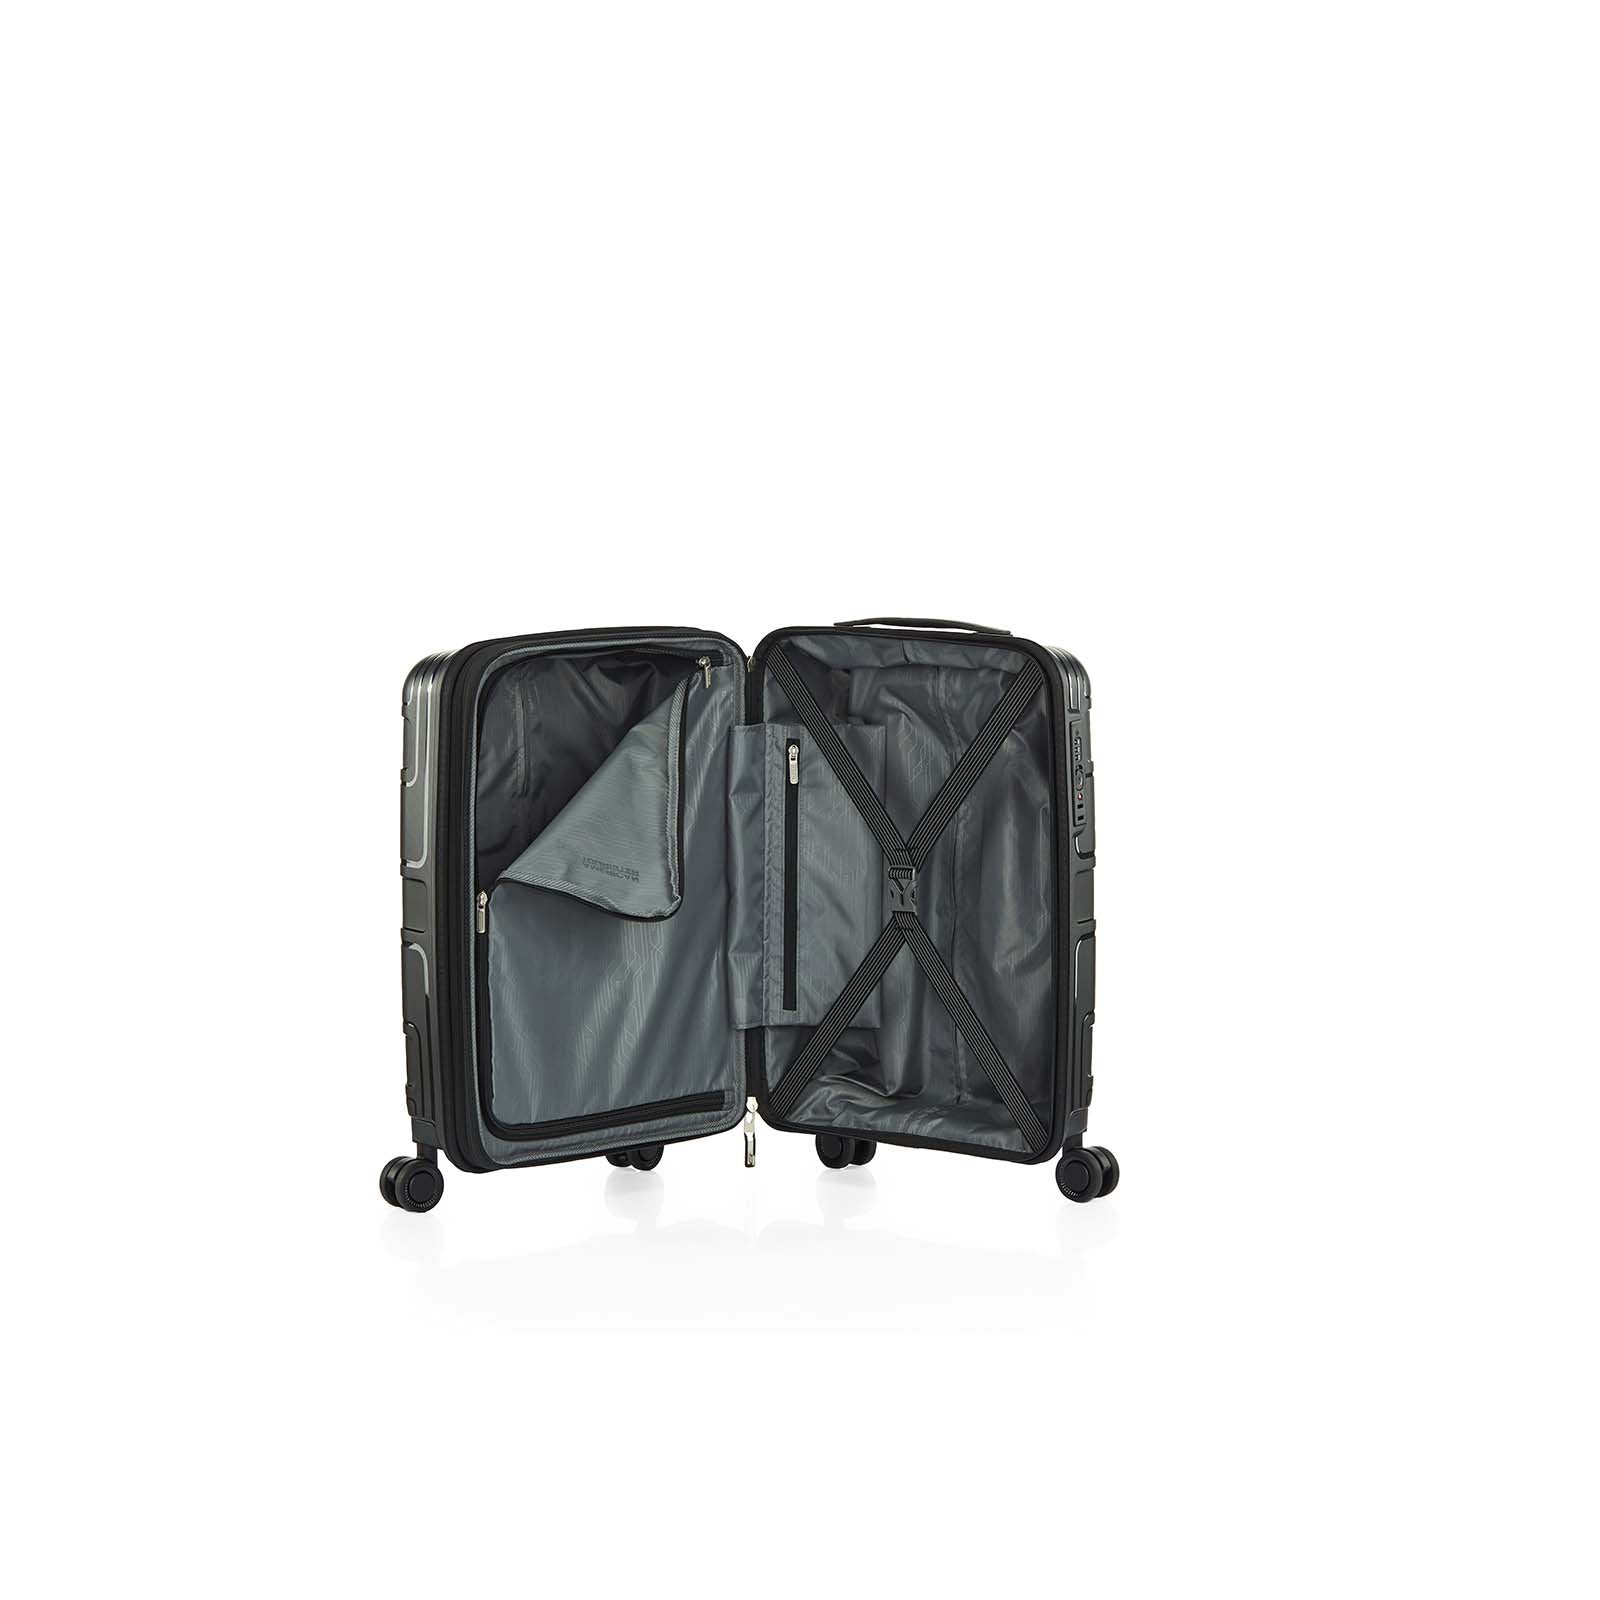 American-Tourister-Light-Max-55cm-Carry-On-Suitcase-Black-Open